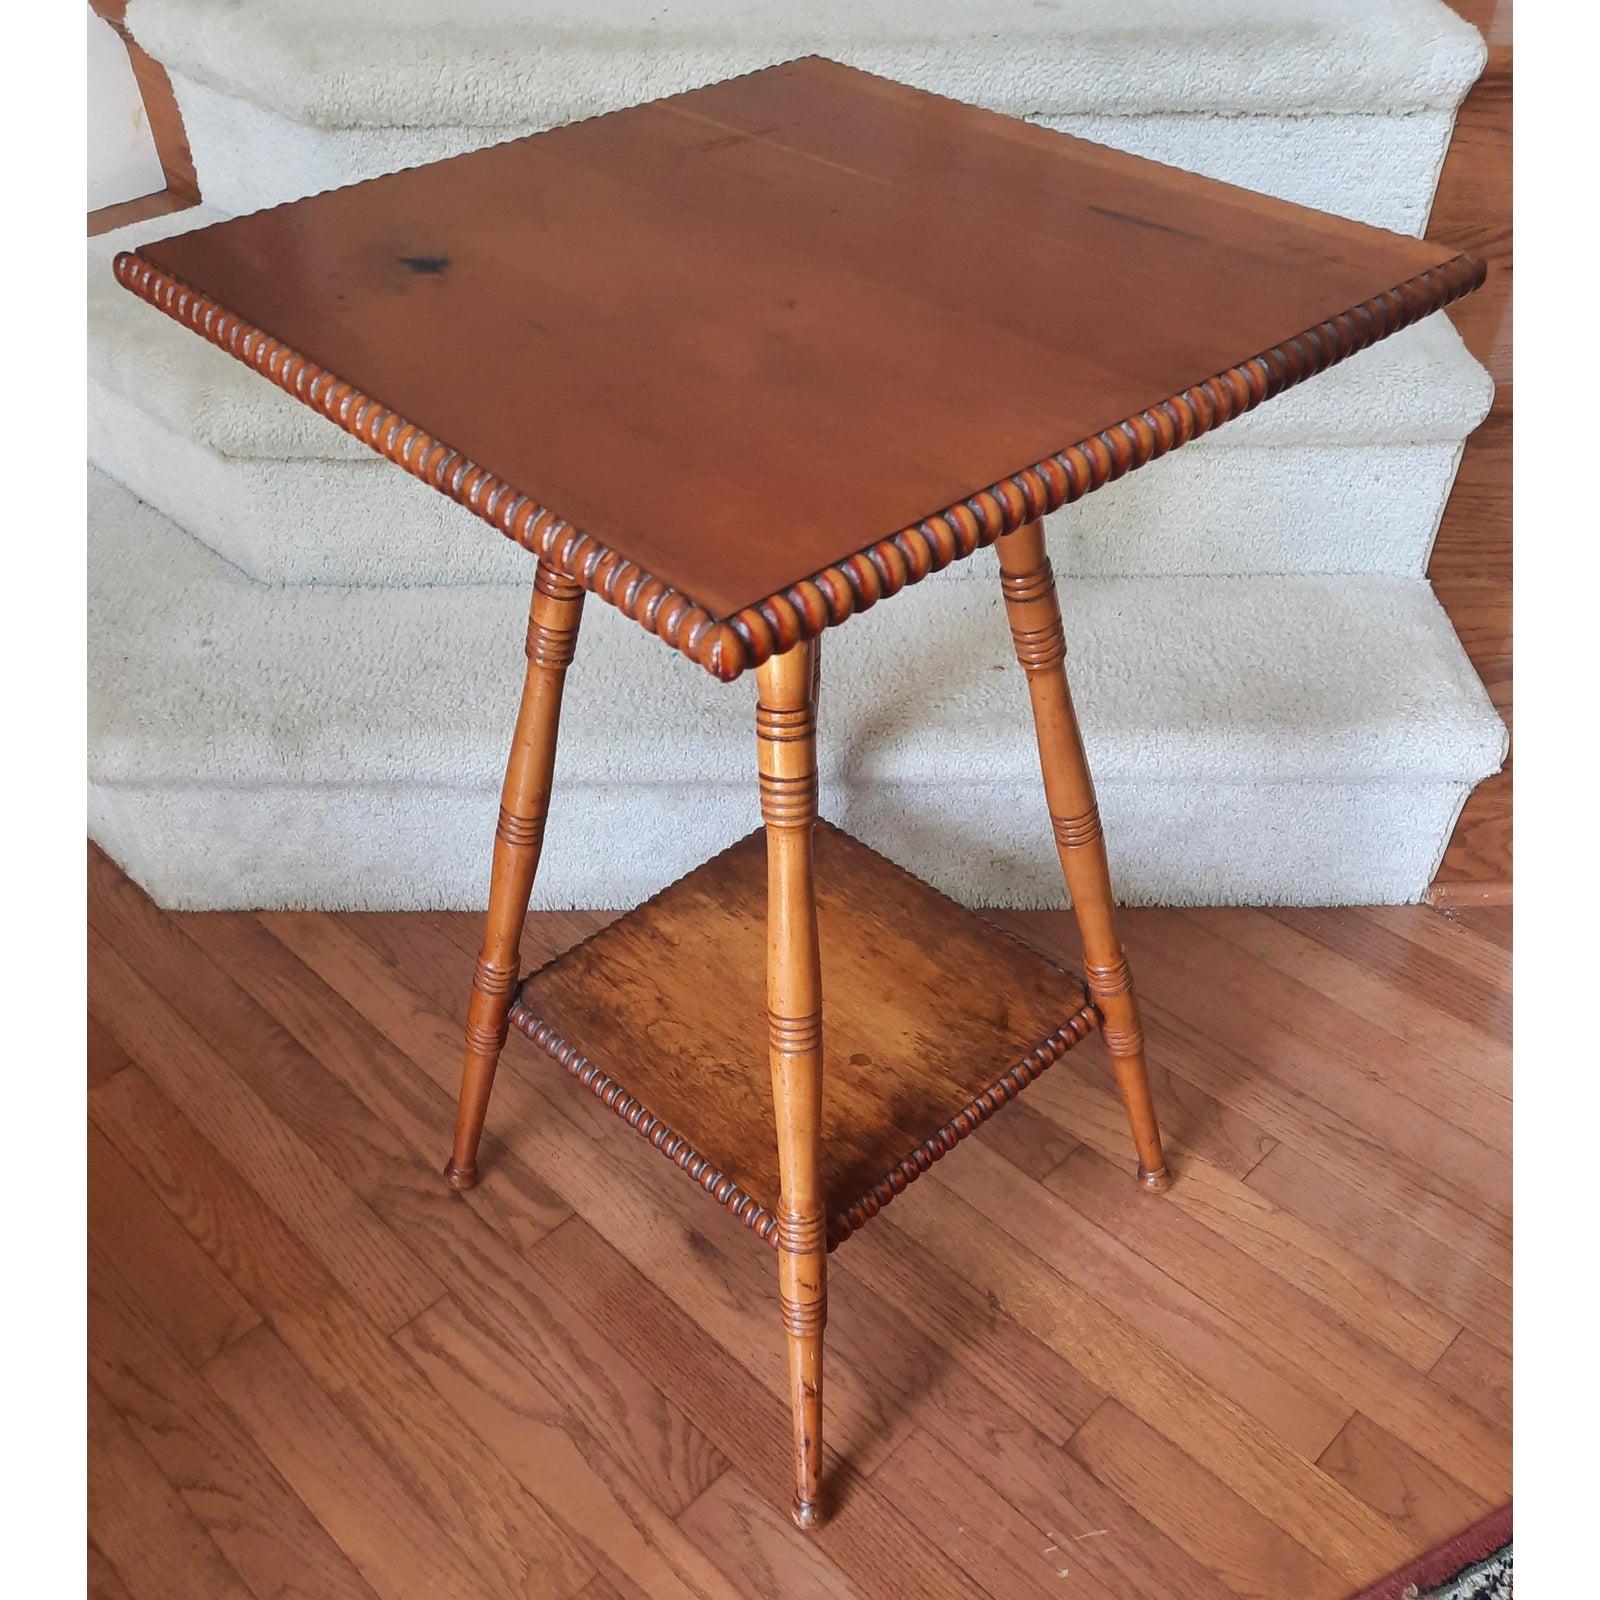 Early American Bobbin Leg Parlor Accent Table In Good Condition For Sale In Germantown, MD